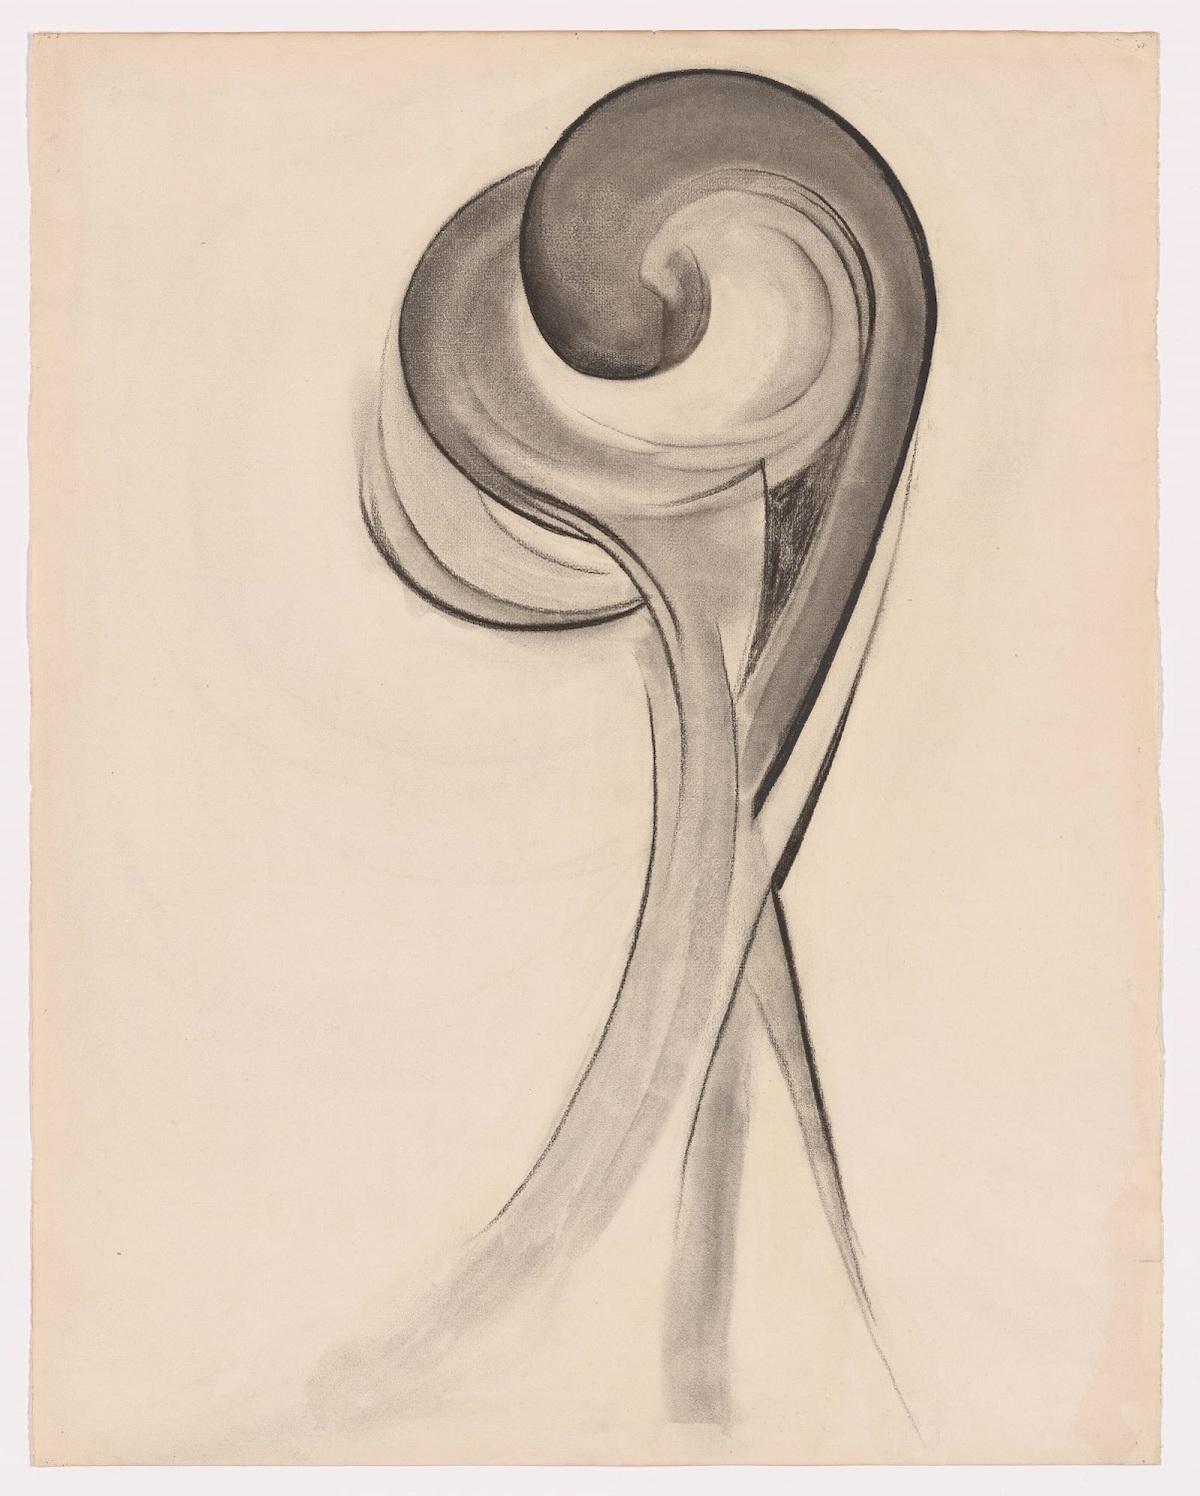 Georgia O’Keeffe. No. 12 Special, 1916. Charcoal on paper. 